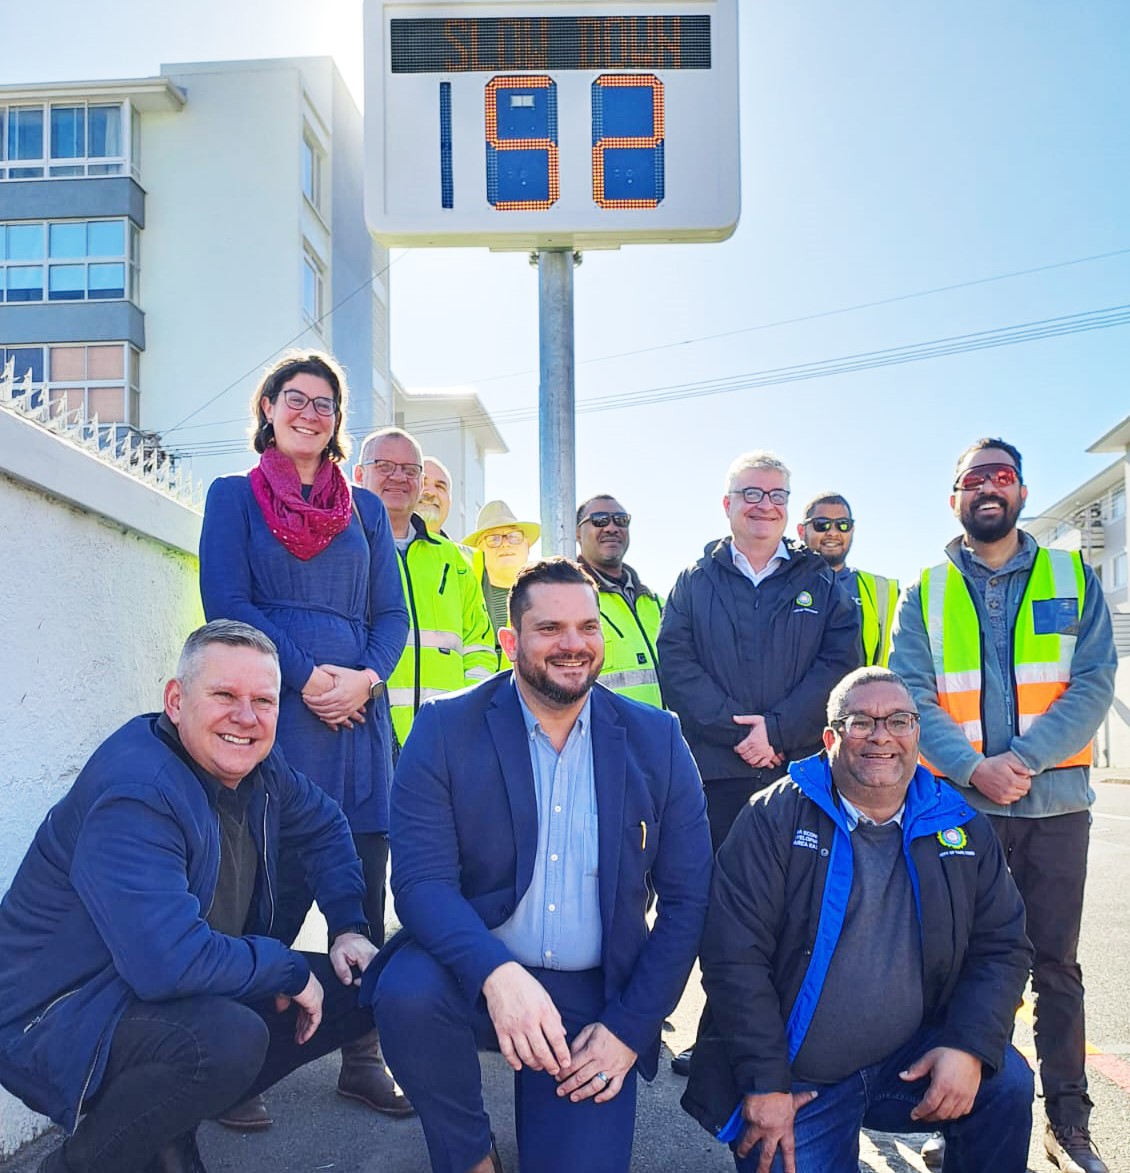 cape town, smart speed signs, cape town installs “smart speed signs” to reduce speeding